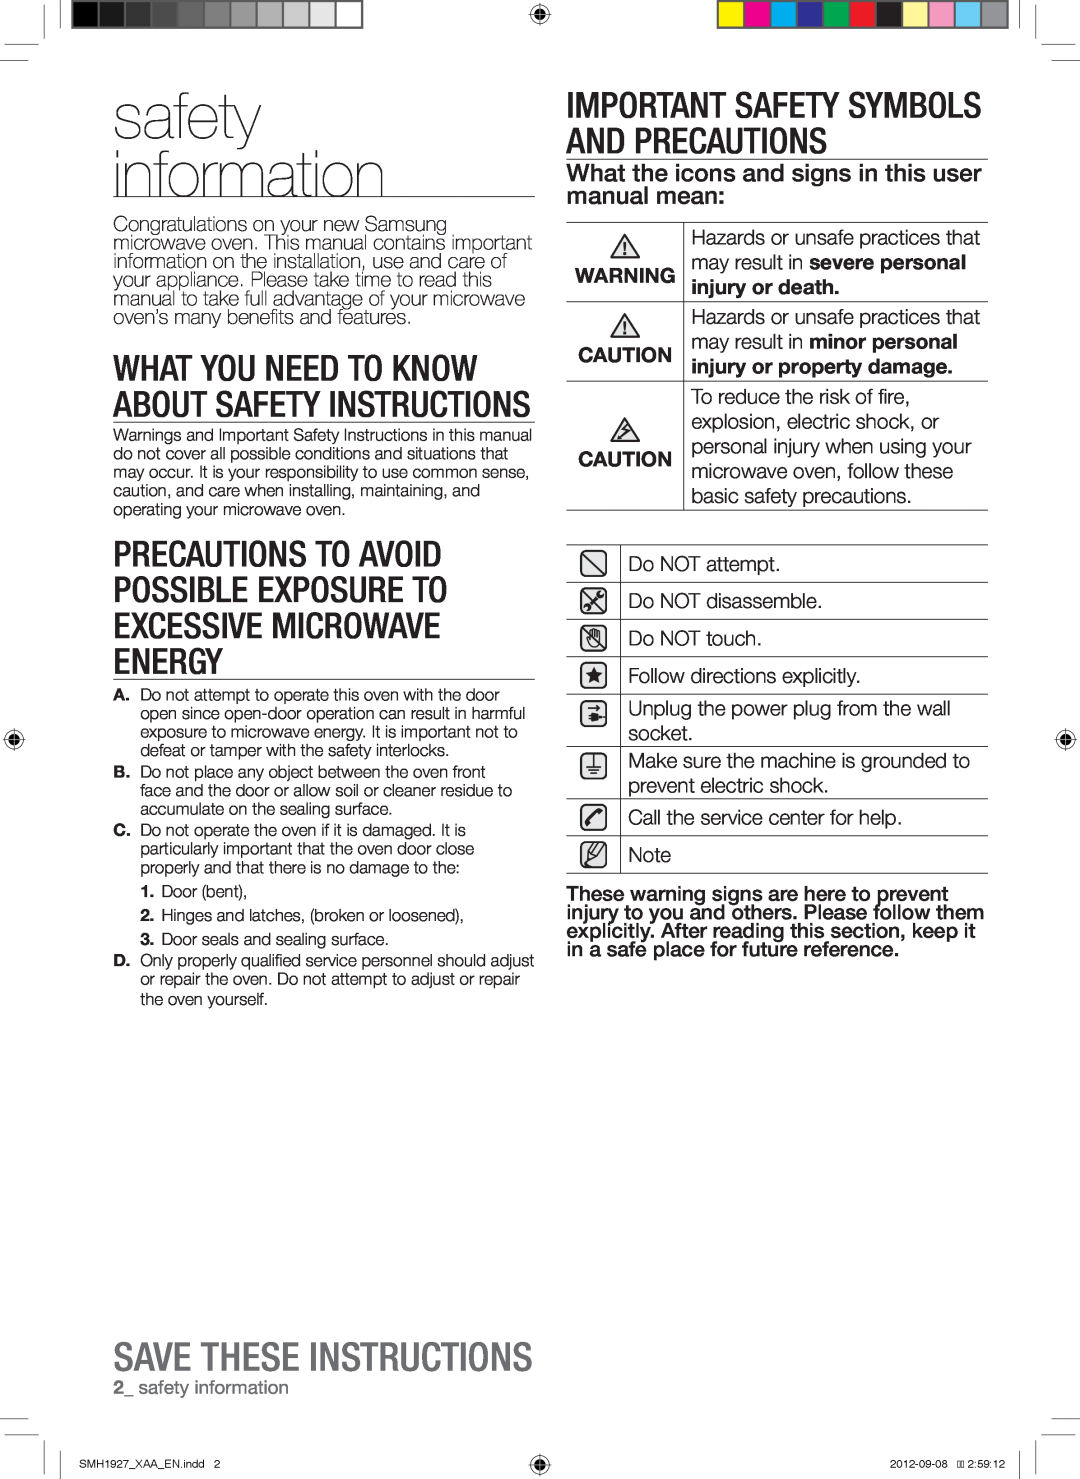 Samsung SMH1927B, SMH1927S safety information, What You Need To Know About Safety Instructions, Save These Instructions 